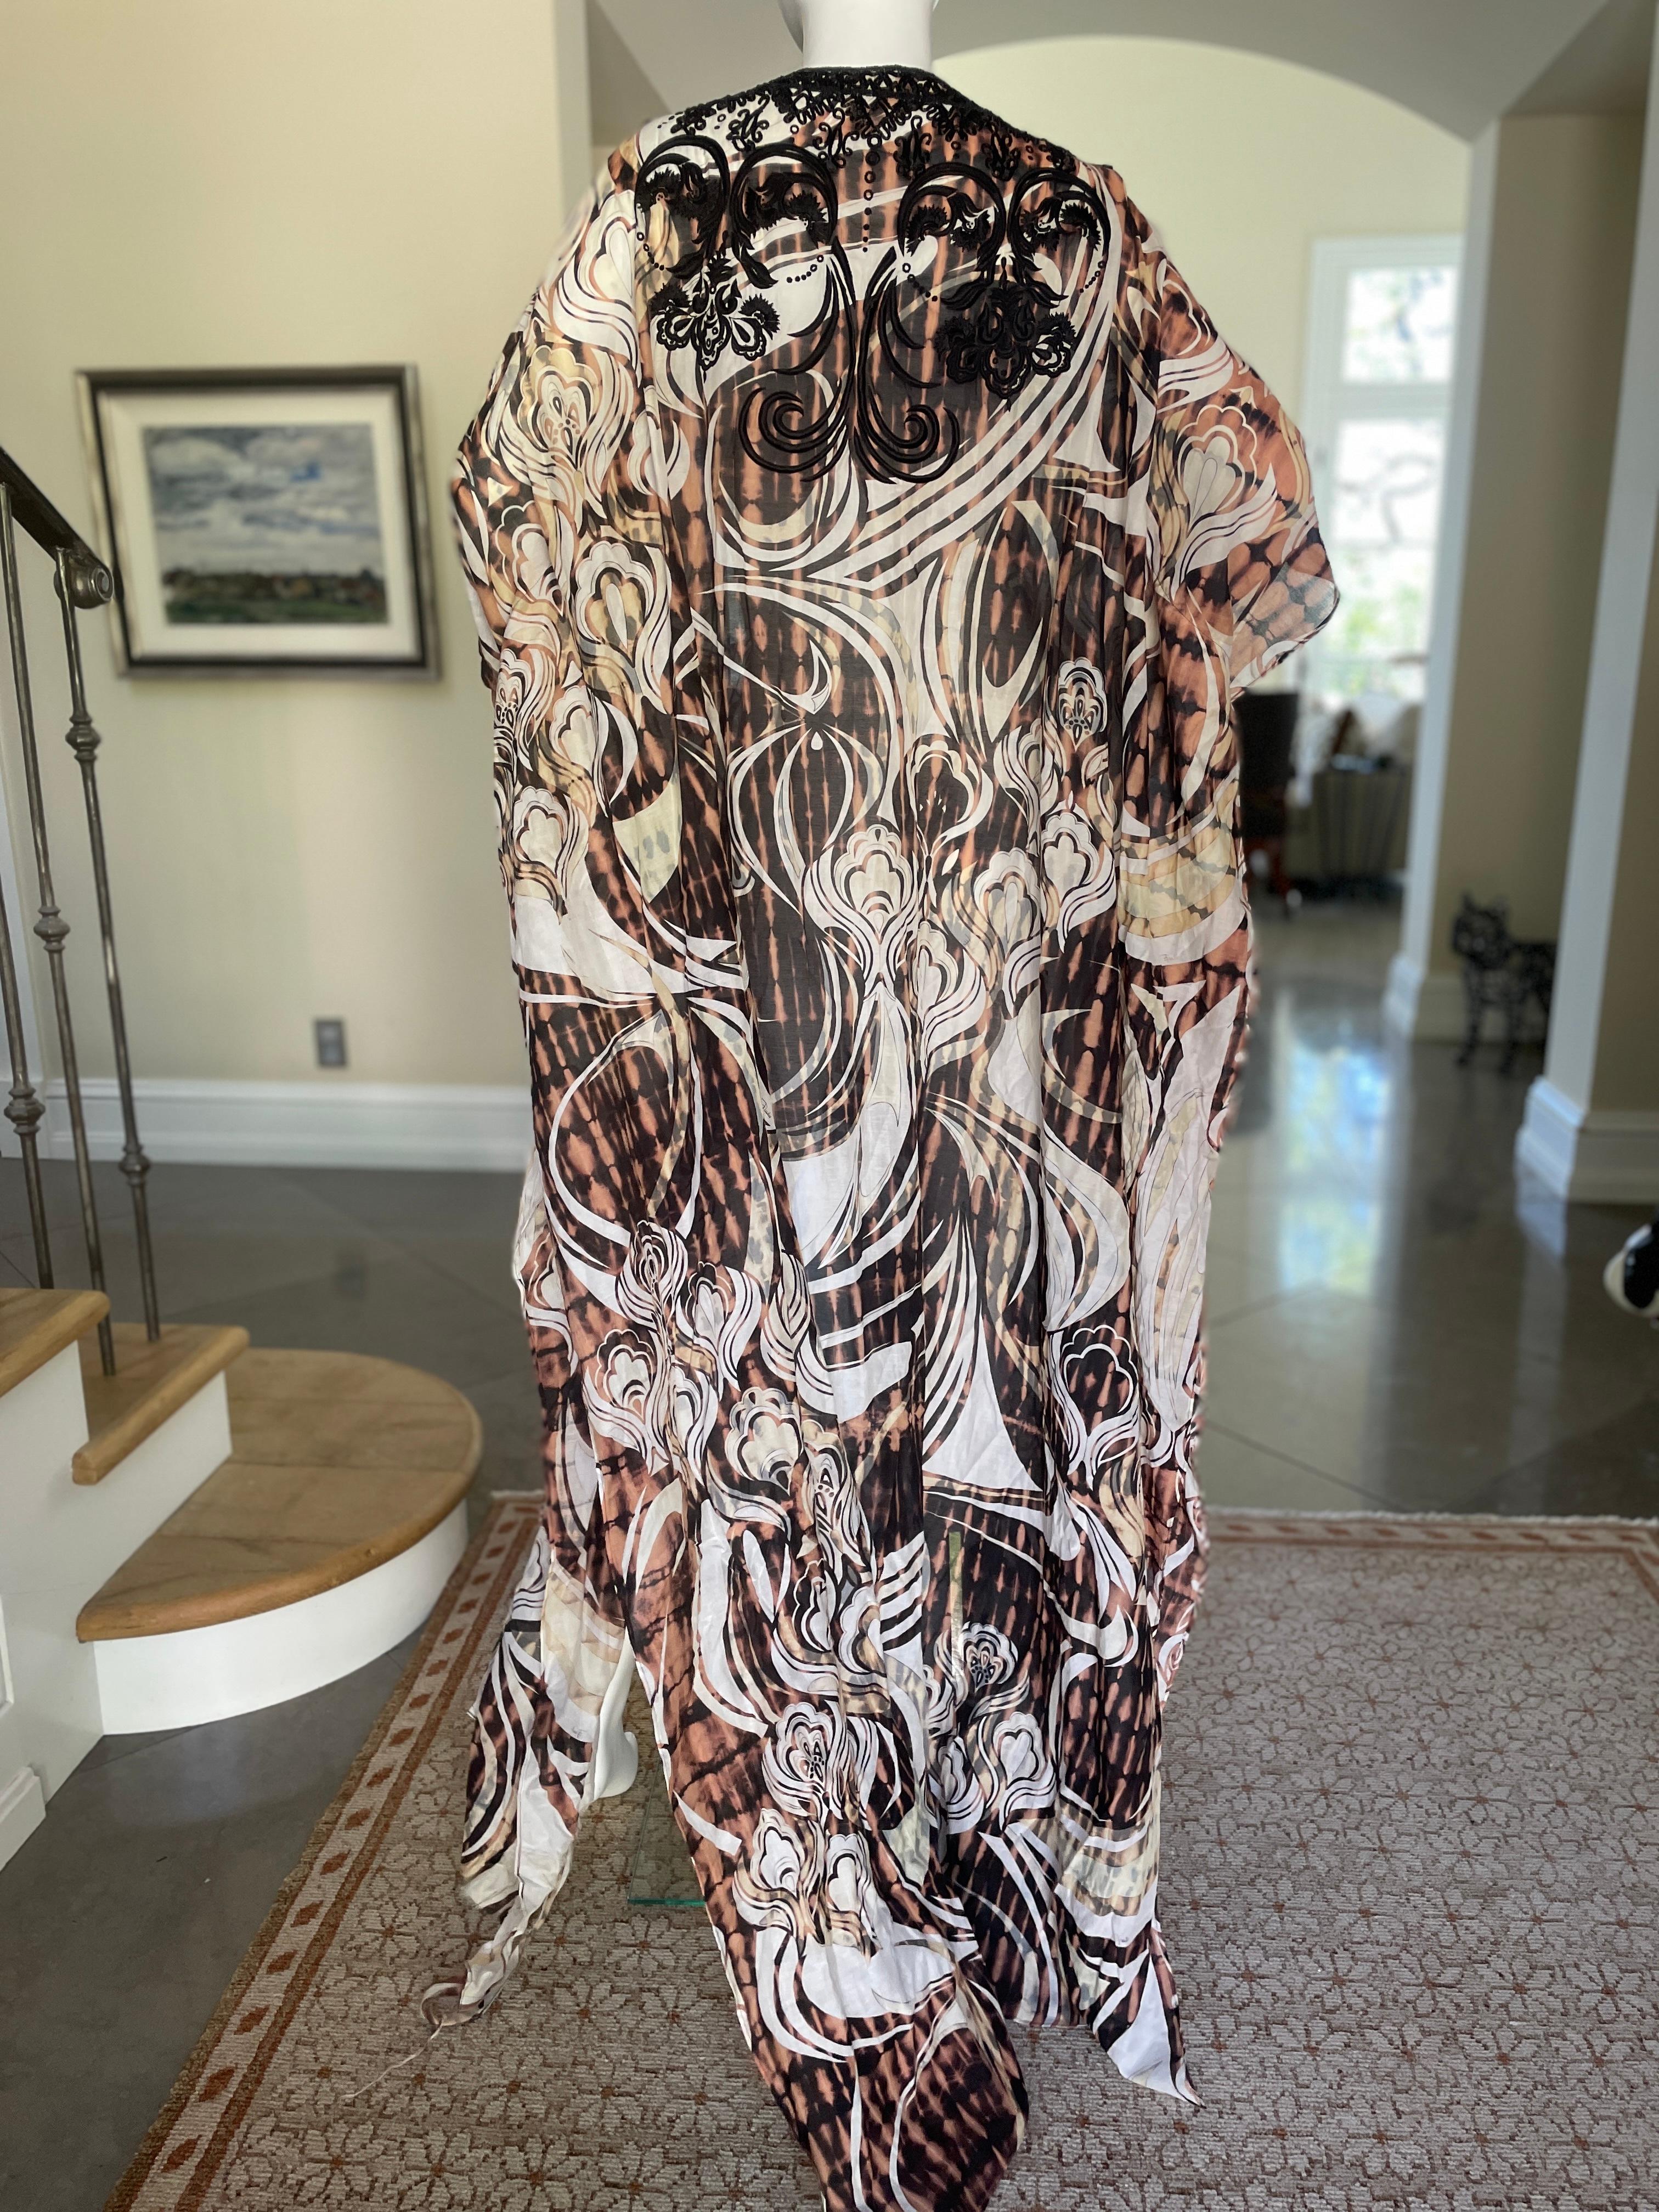 Emilio Pucci by Peter Dundas Vintage Caftan Kaftan Dress with Corset Lacing
This is so pretty, please use the zoom feature to see the details.
There is no brand label , but Emilio is printed throughout the fabric.
One size fits all.
Bust 55